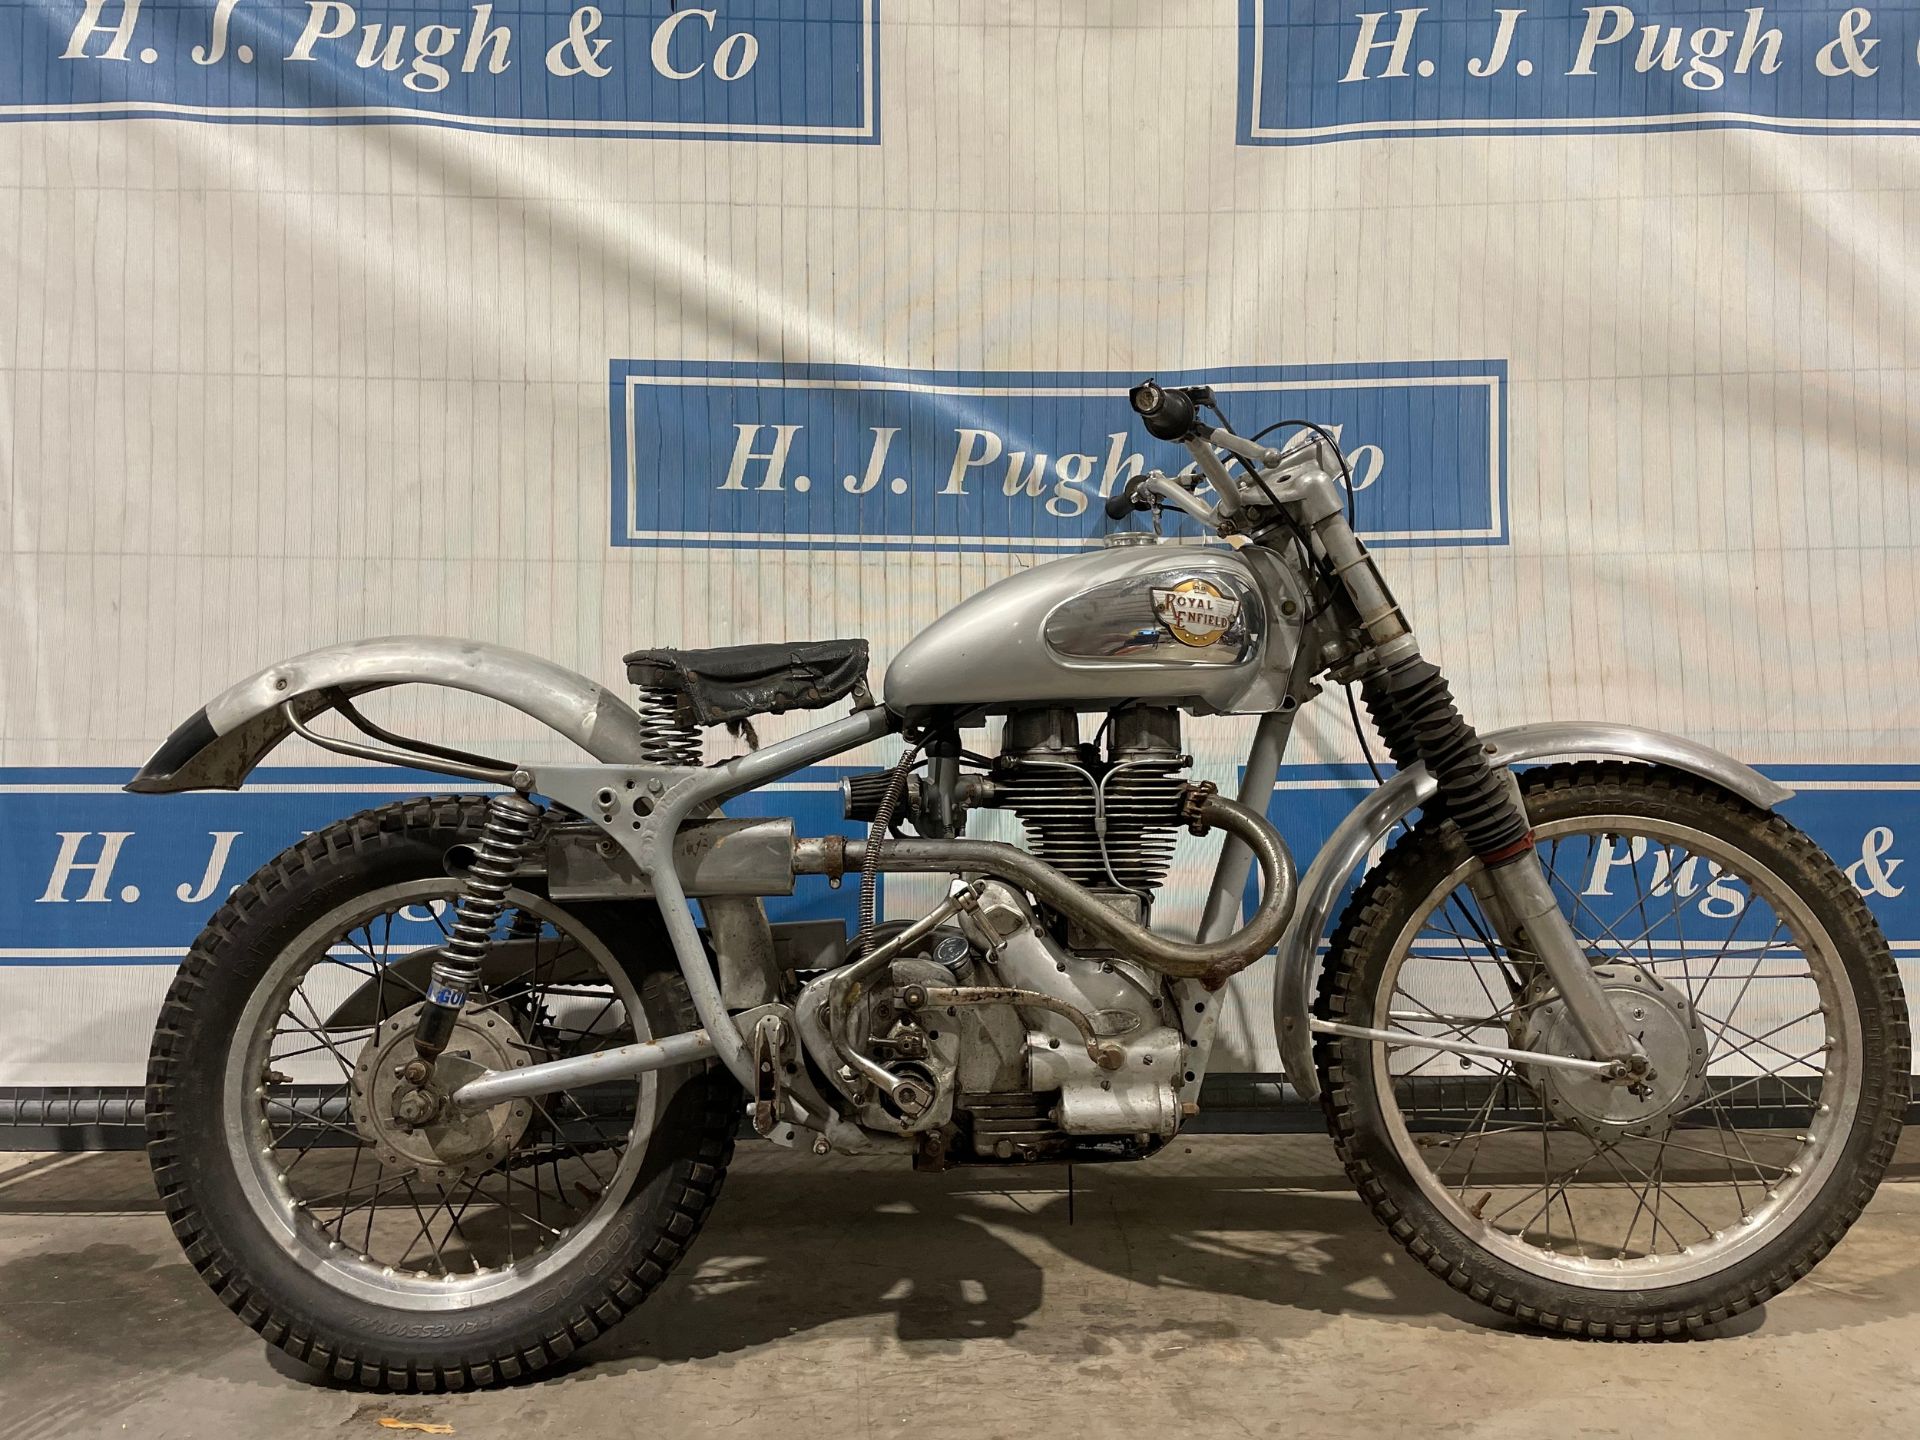 Royal Enfield 350cc motorcycle. 1959. Performs well. Reg 631 XVU. V5 - Image 2 of 16